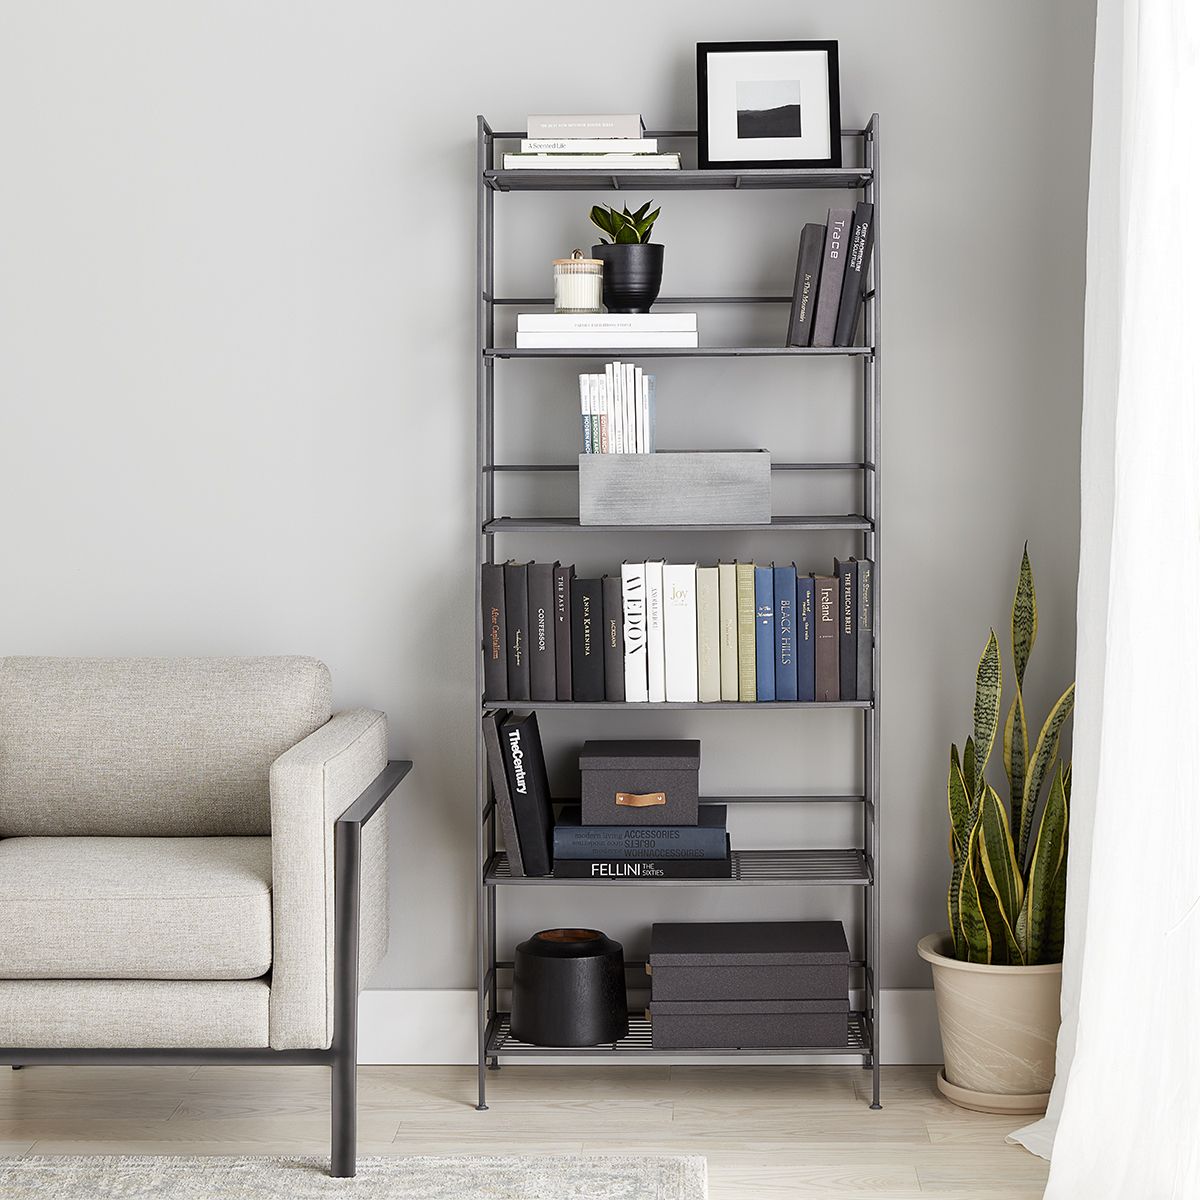 6 Shelf Iron Folding Bookshelf | The Container Store With Regard To 30 Inch Bookcases (View 10 of 15)